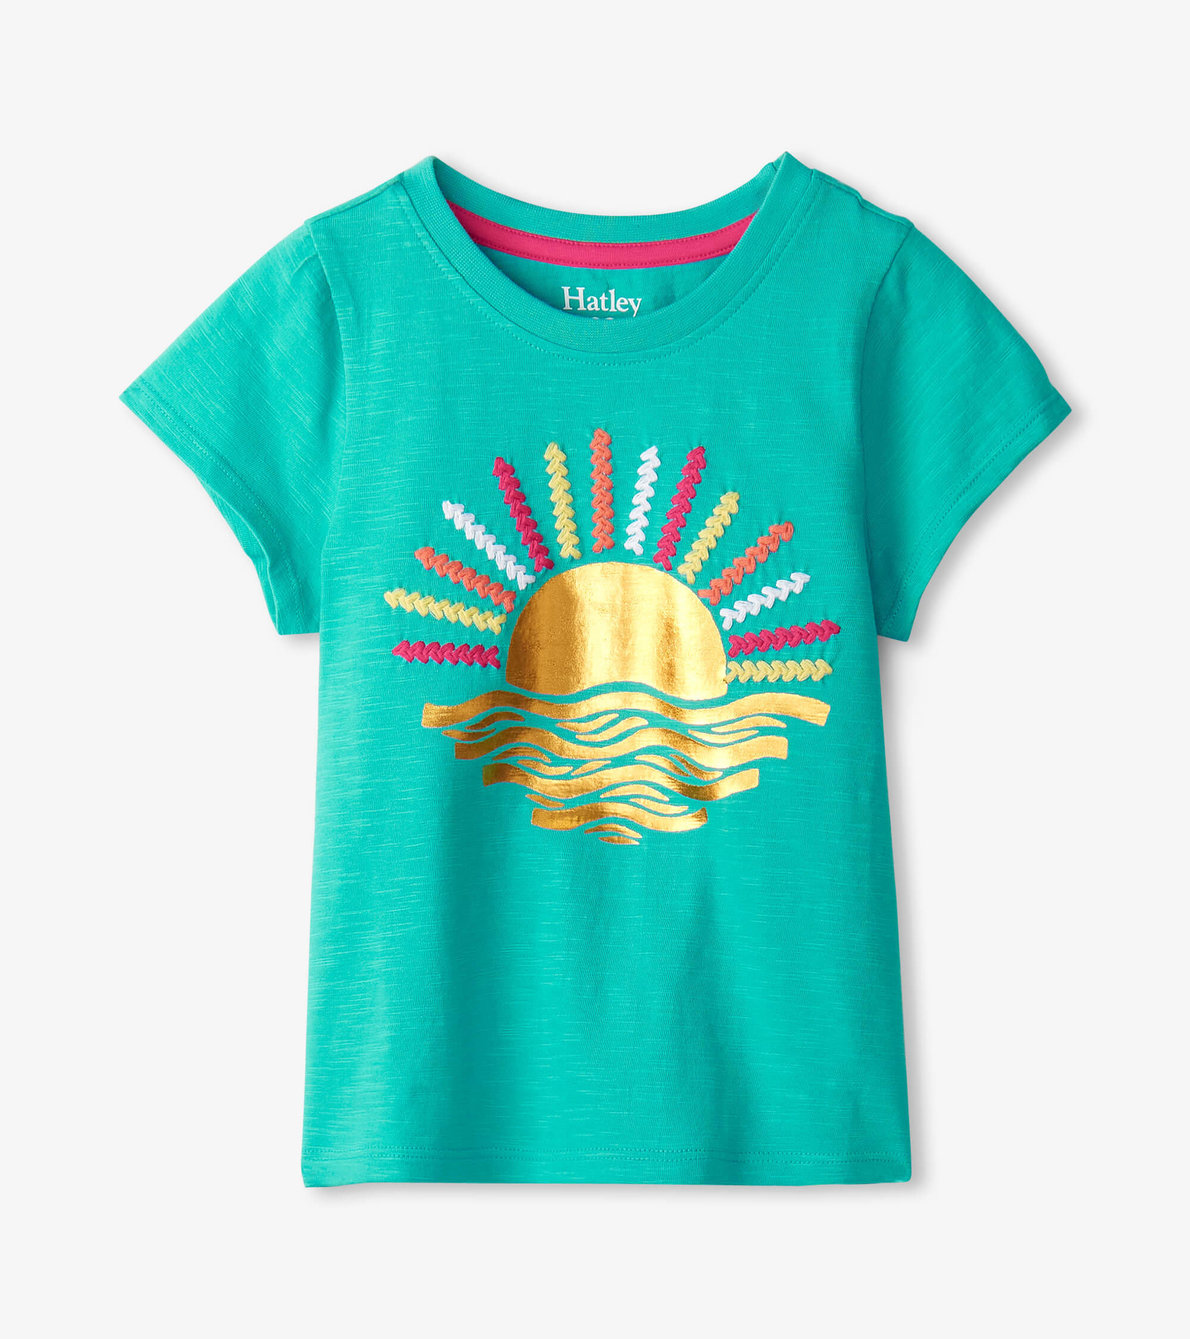 View larger image of Girls Sunny Days Graphic Tee